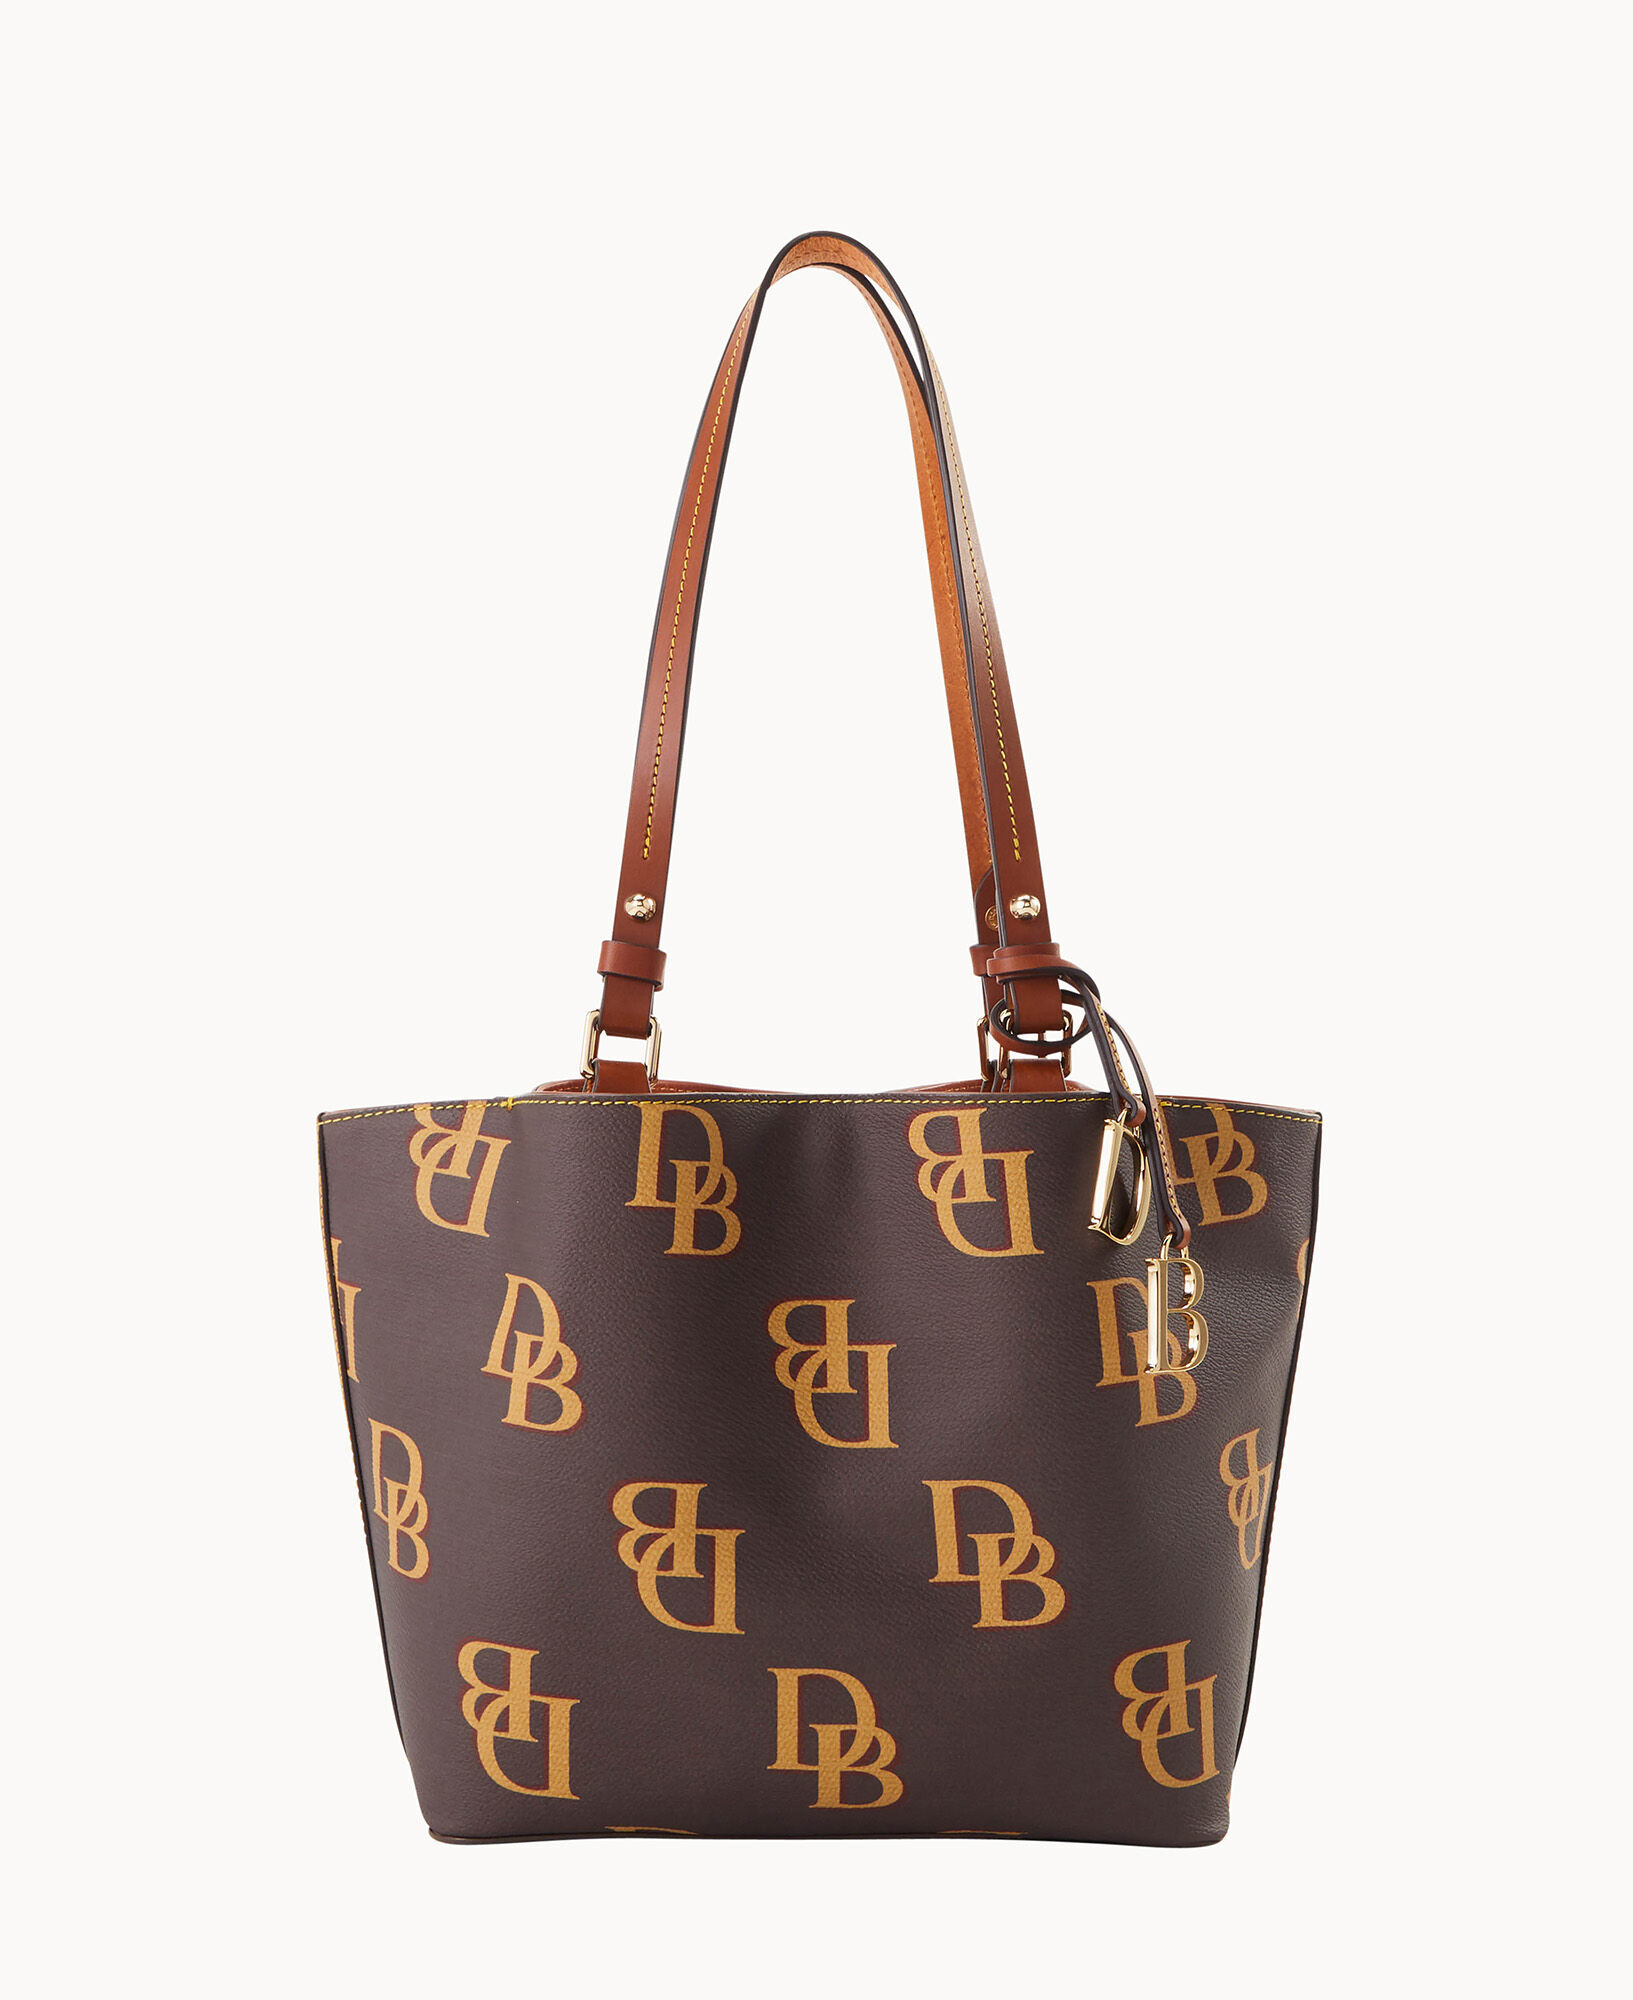 Louis Vuitton 5 Monogram with Veg Tan Leather Face mask use